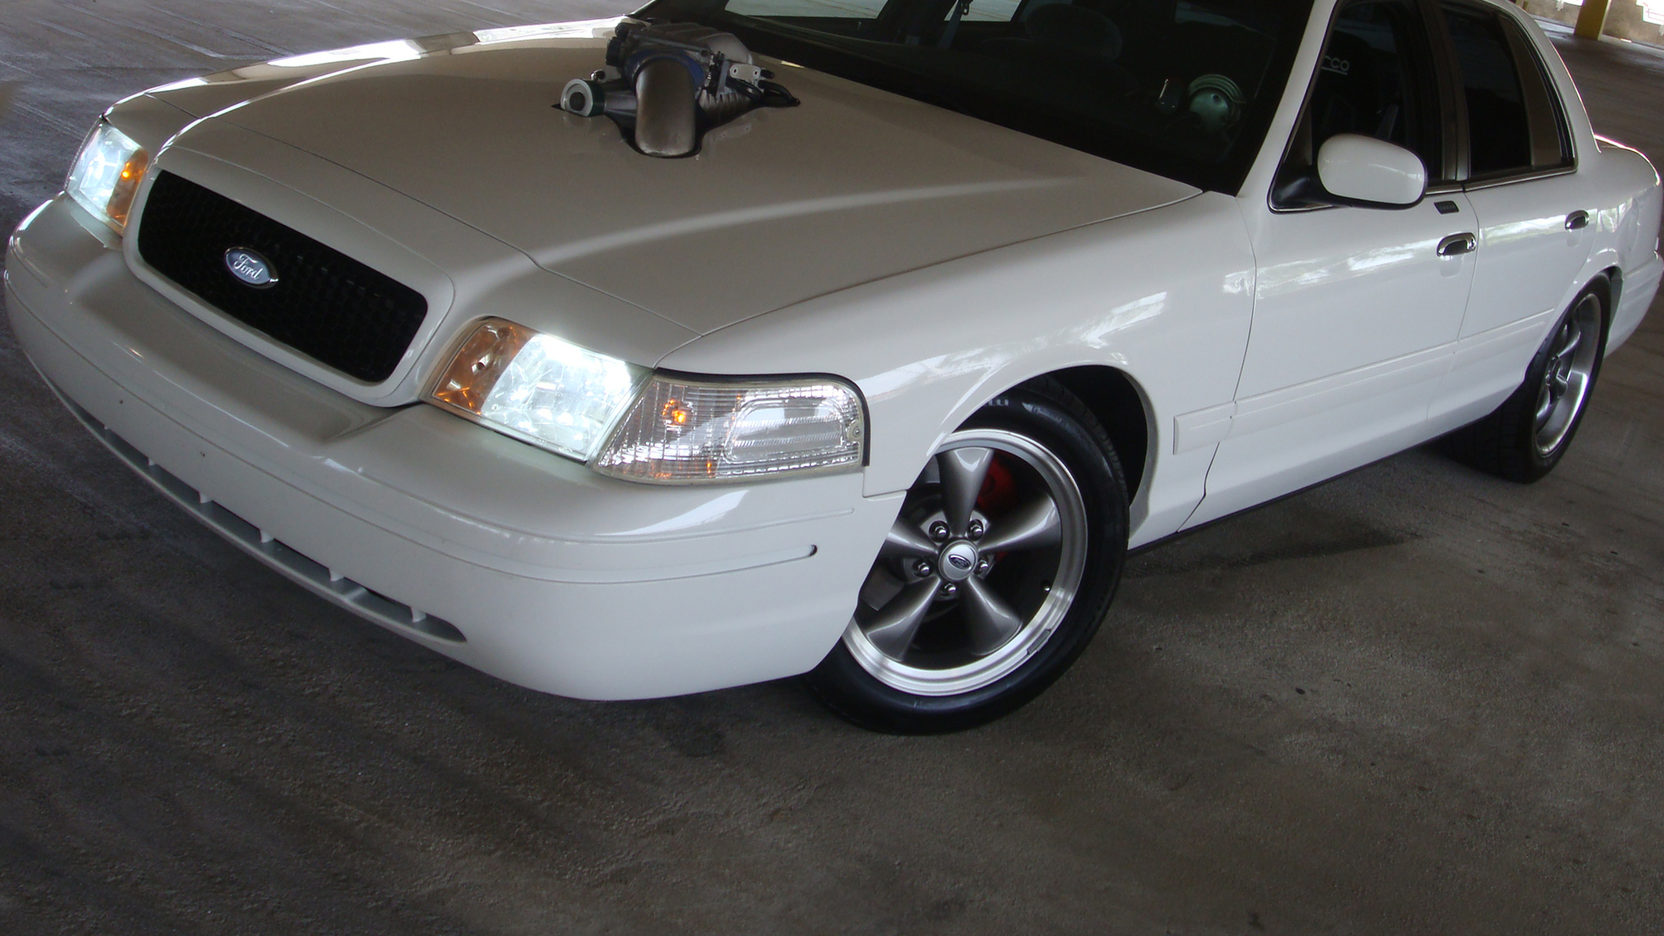 2000 Ford Crown Victoria | T88 | Kissimmee 2012